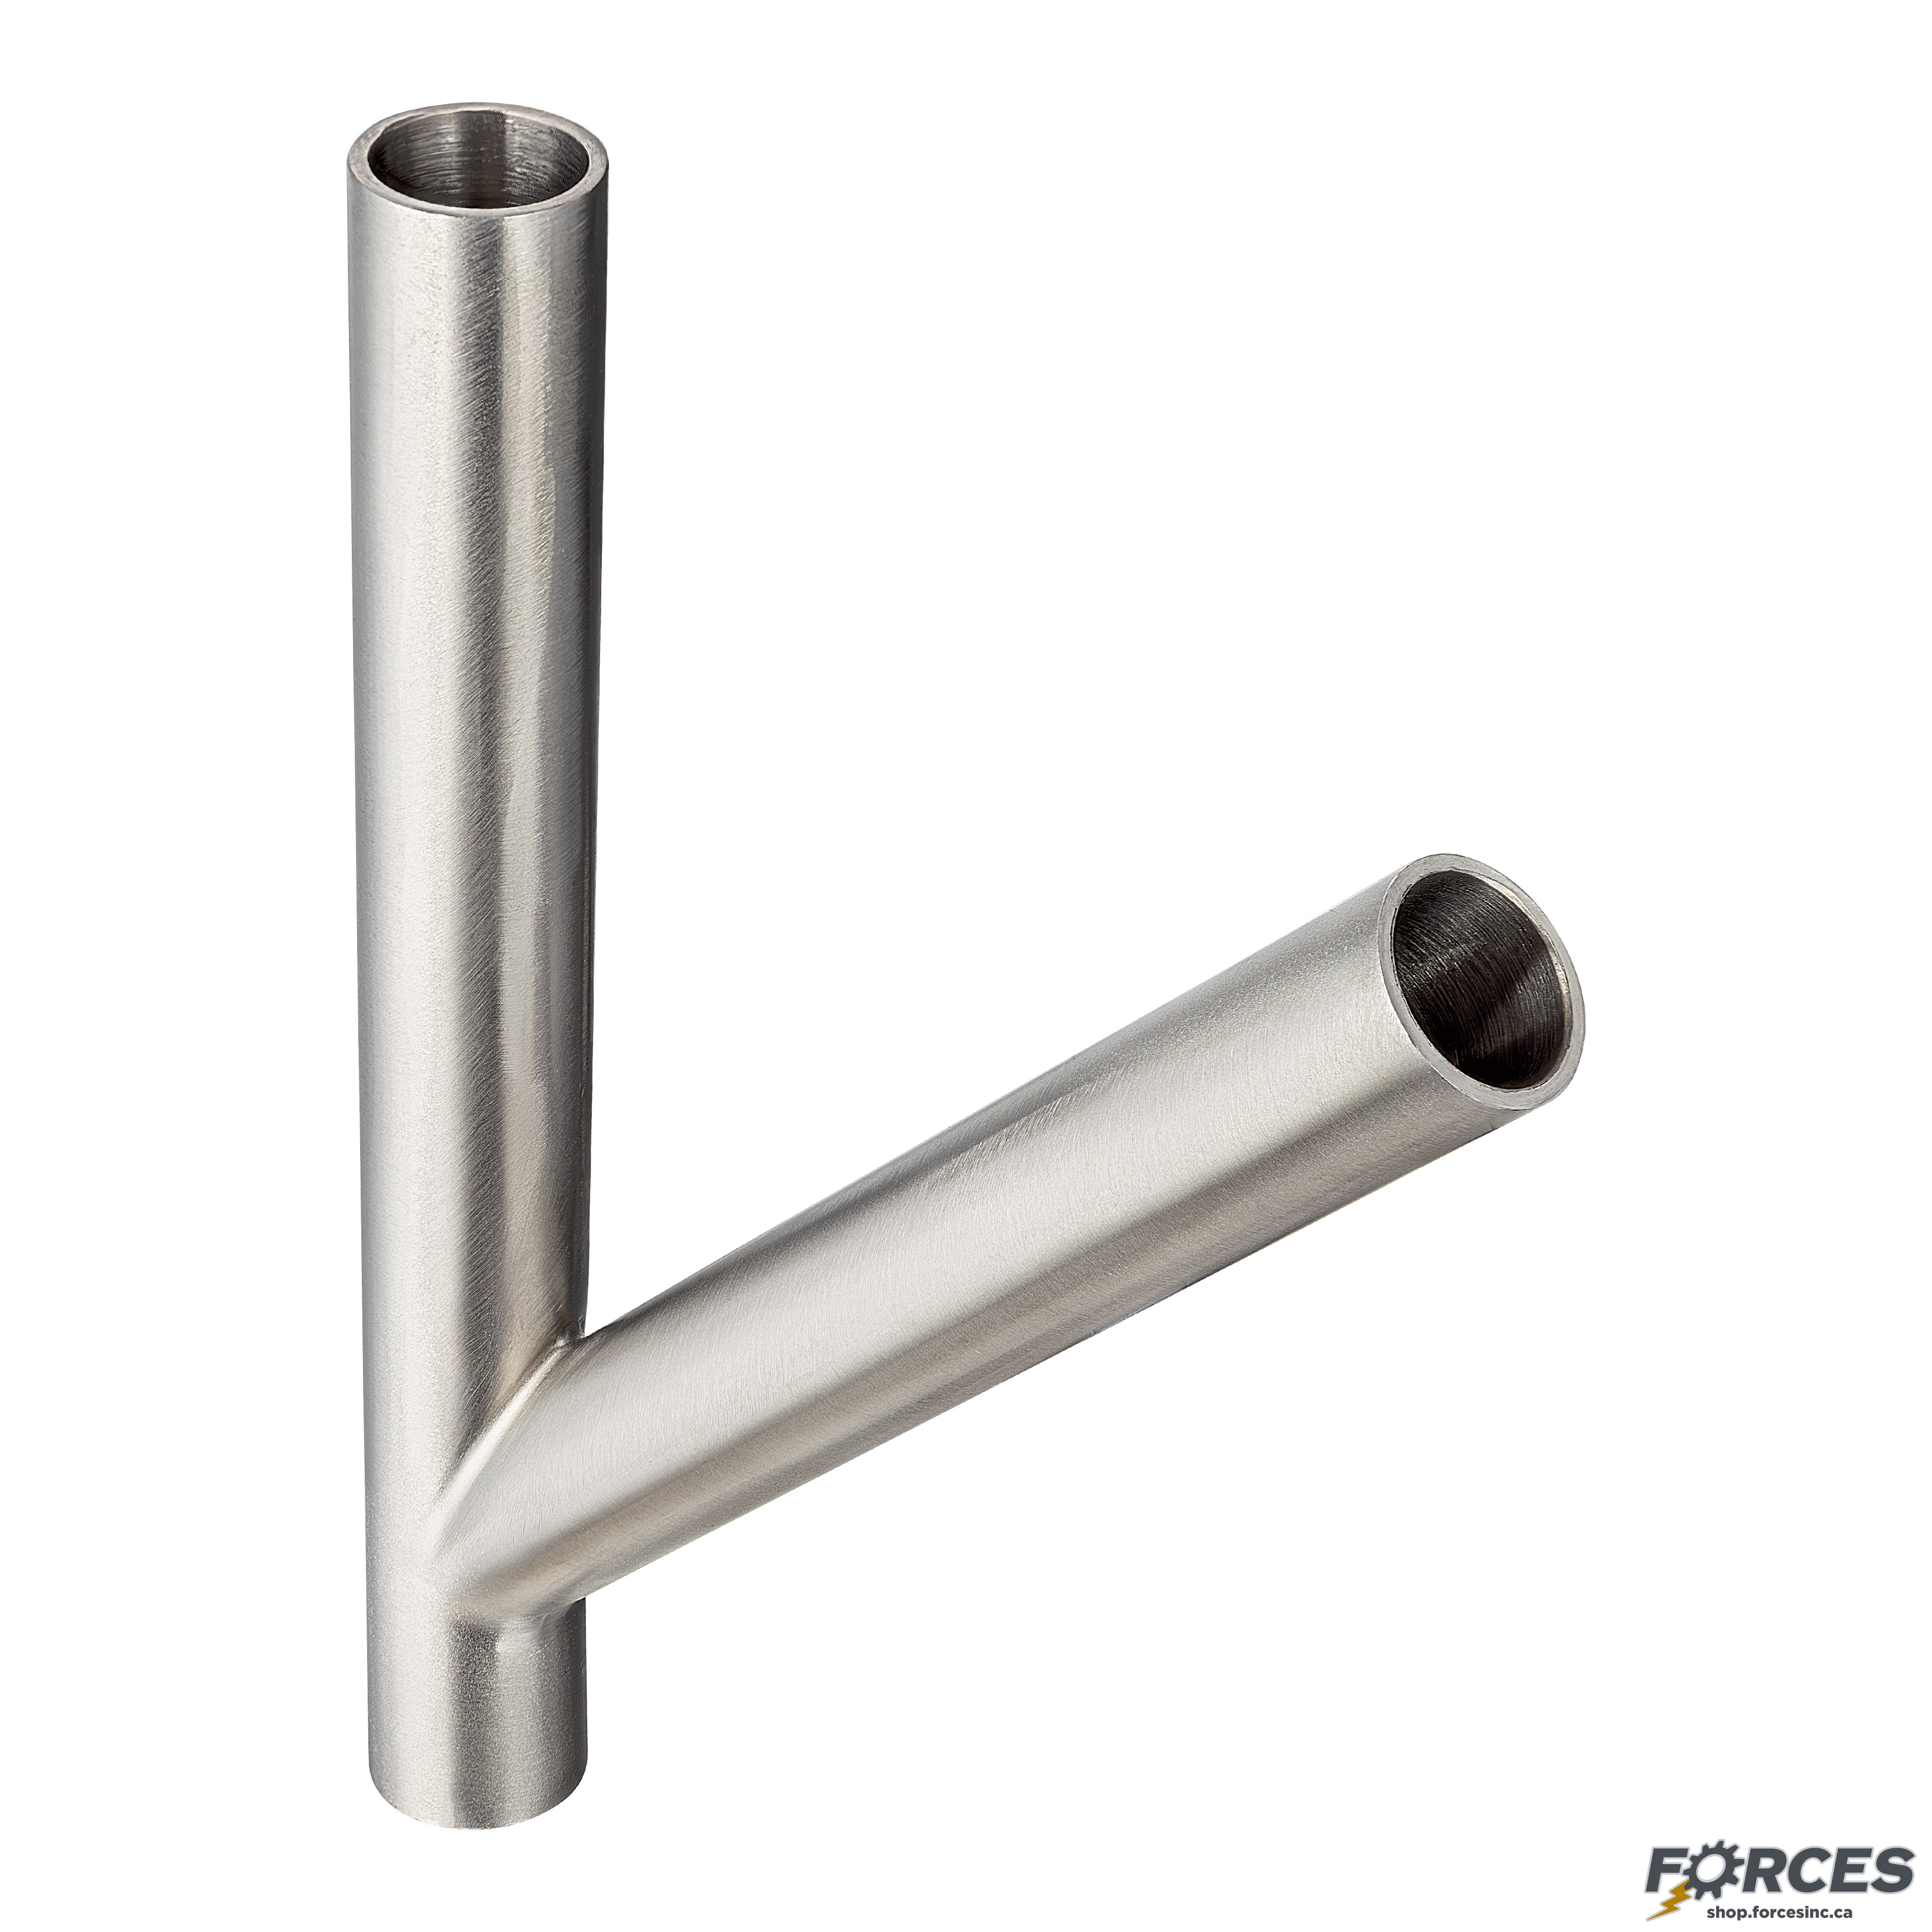 2" Butt Weld 45° Lateral Wye - Stainless Steel 316 - Forces Inc